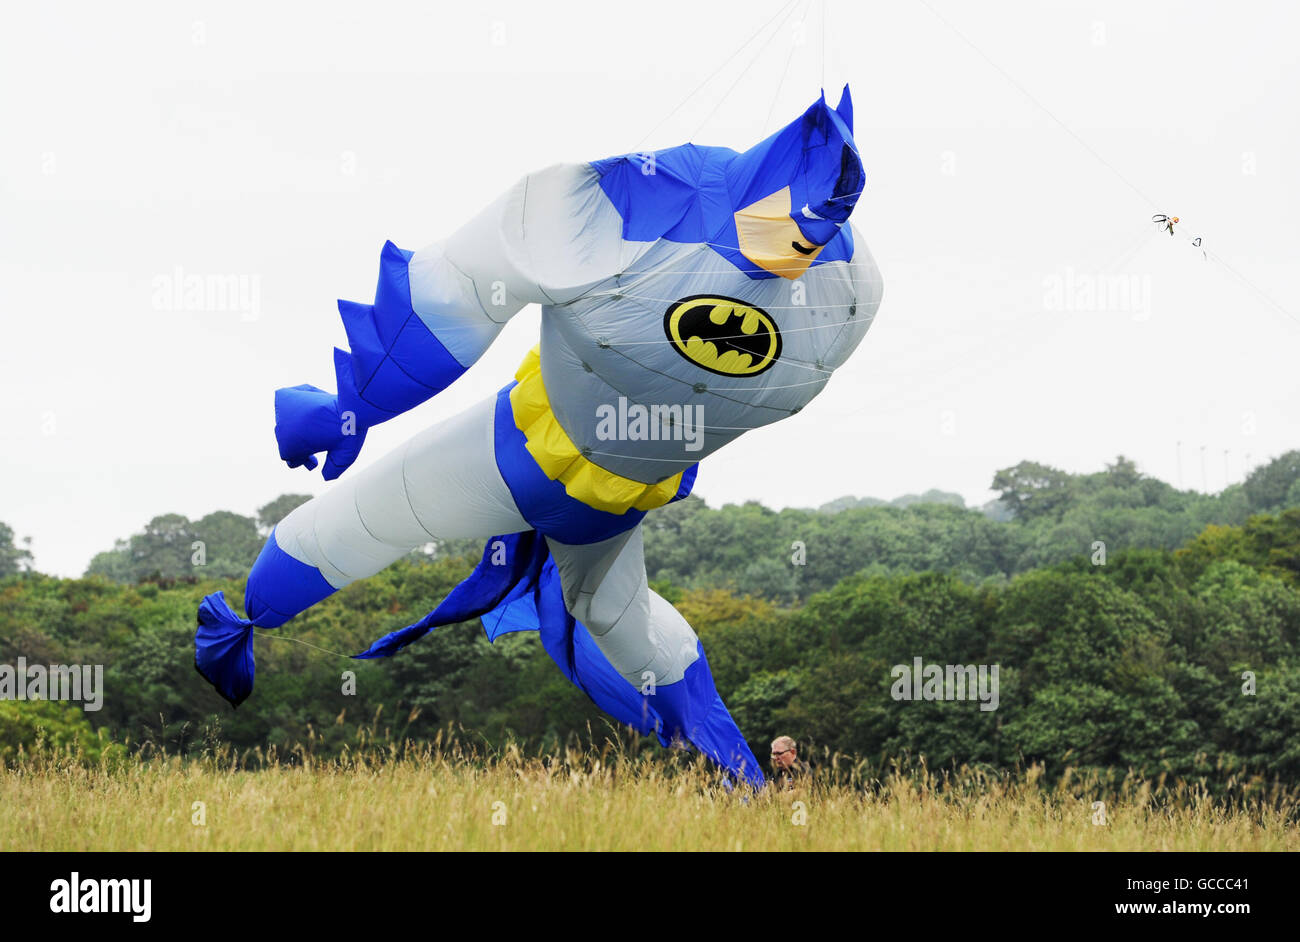 Brighton, UK. 9th July, 2016. Guy Reynolds launches his giant Batman kite in blustery but perfect weather conditions for flying at the annual Brighton Kite Festival held in Stanmer Park on the outskirts of the city over the weekend Credit:  Simon Dack/Alamy Live News Stock Photo